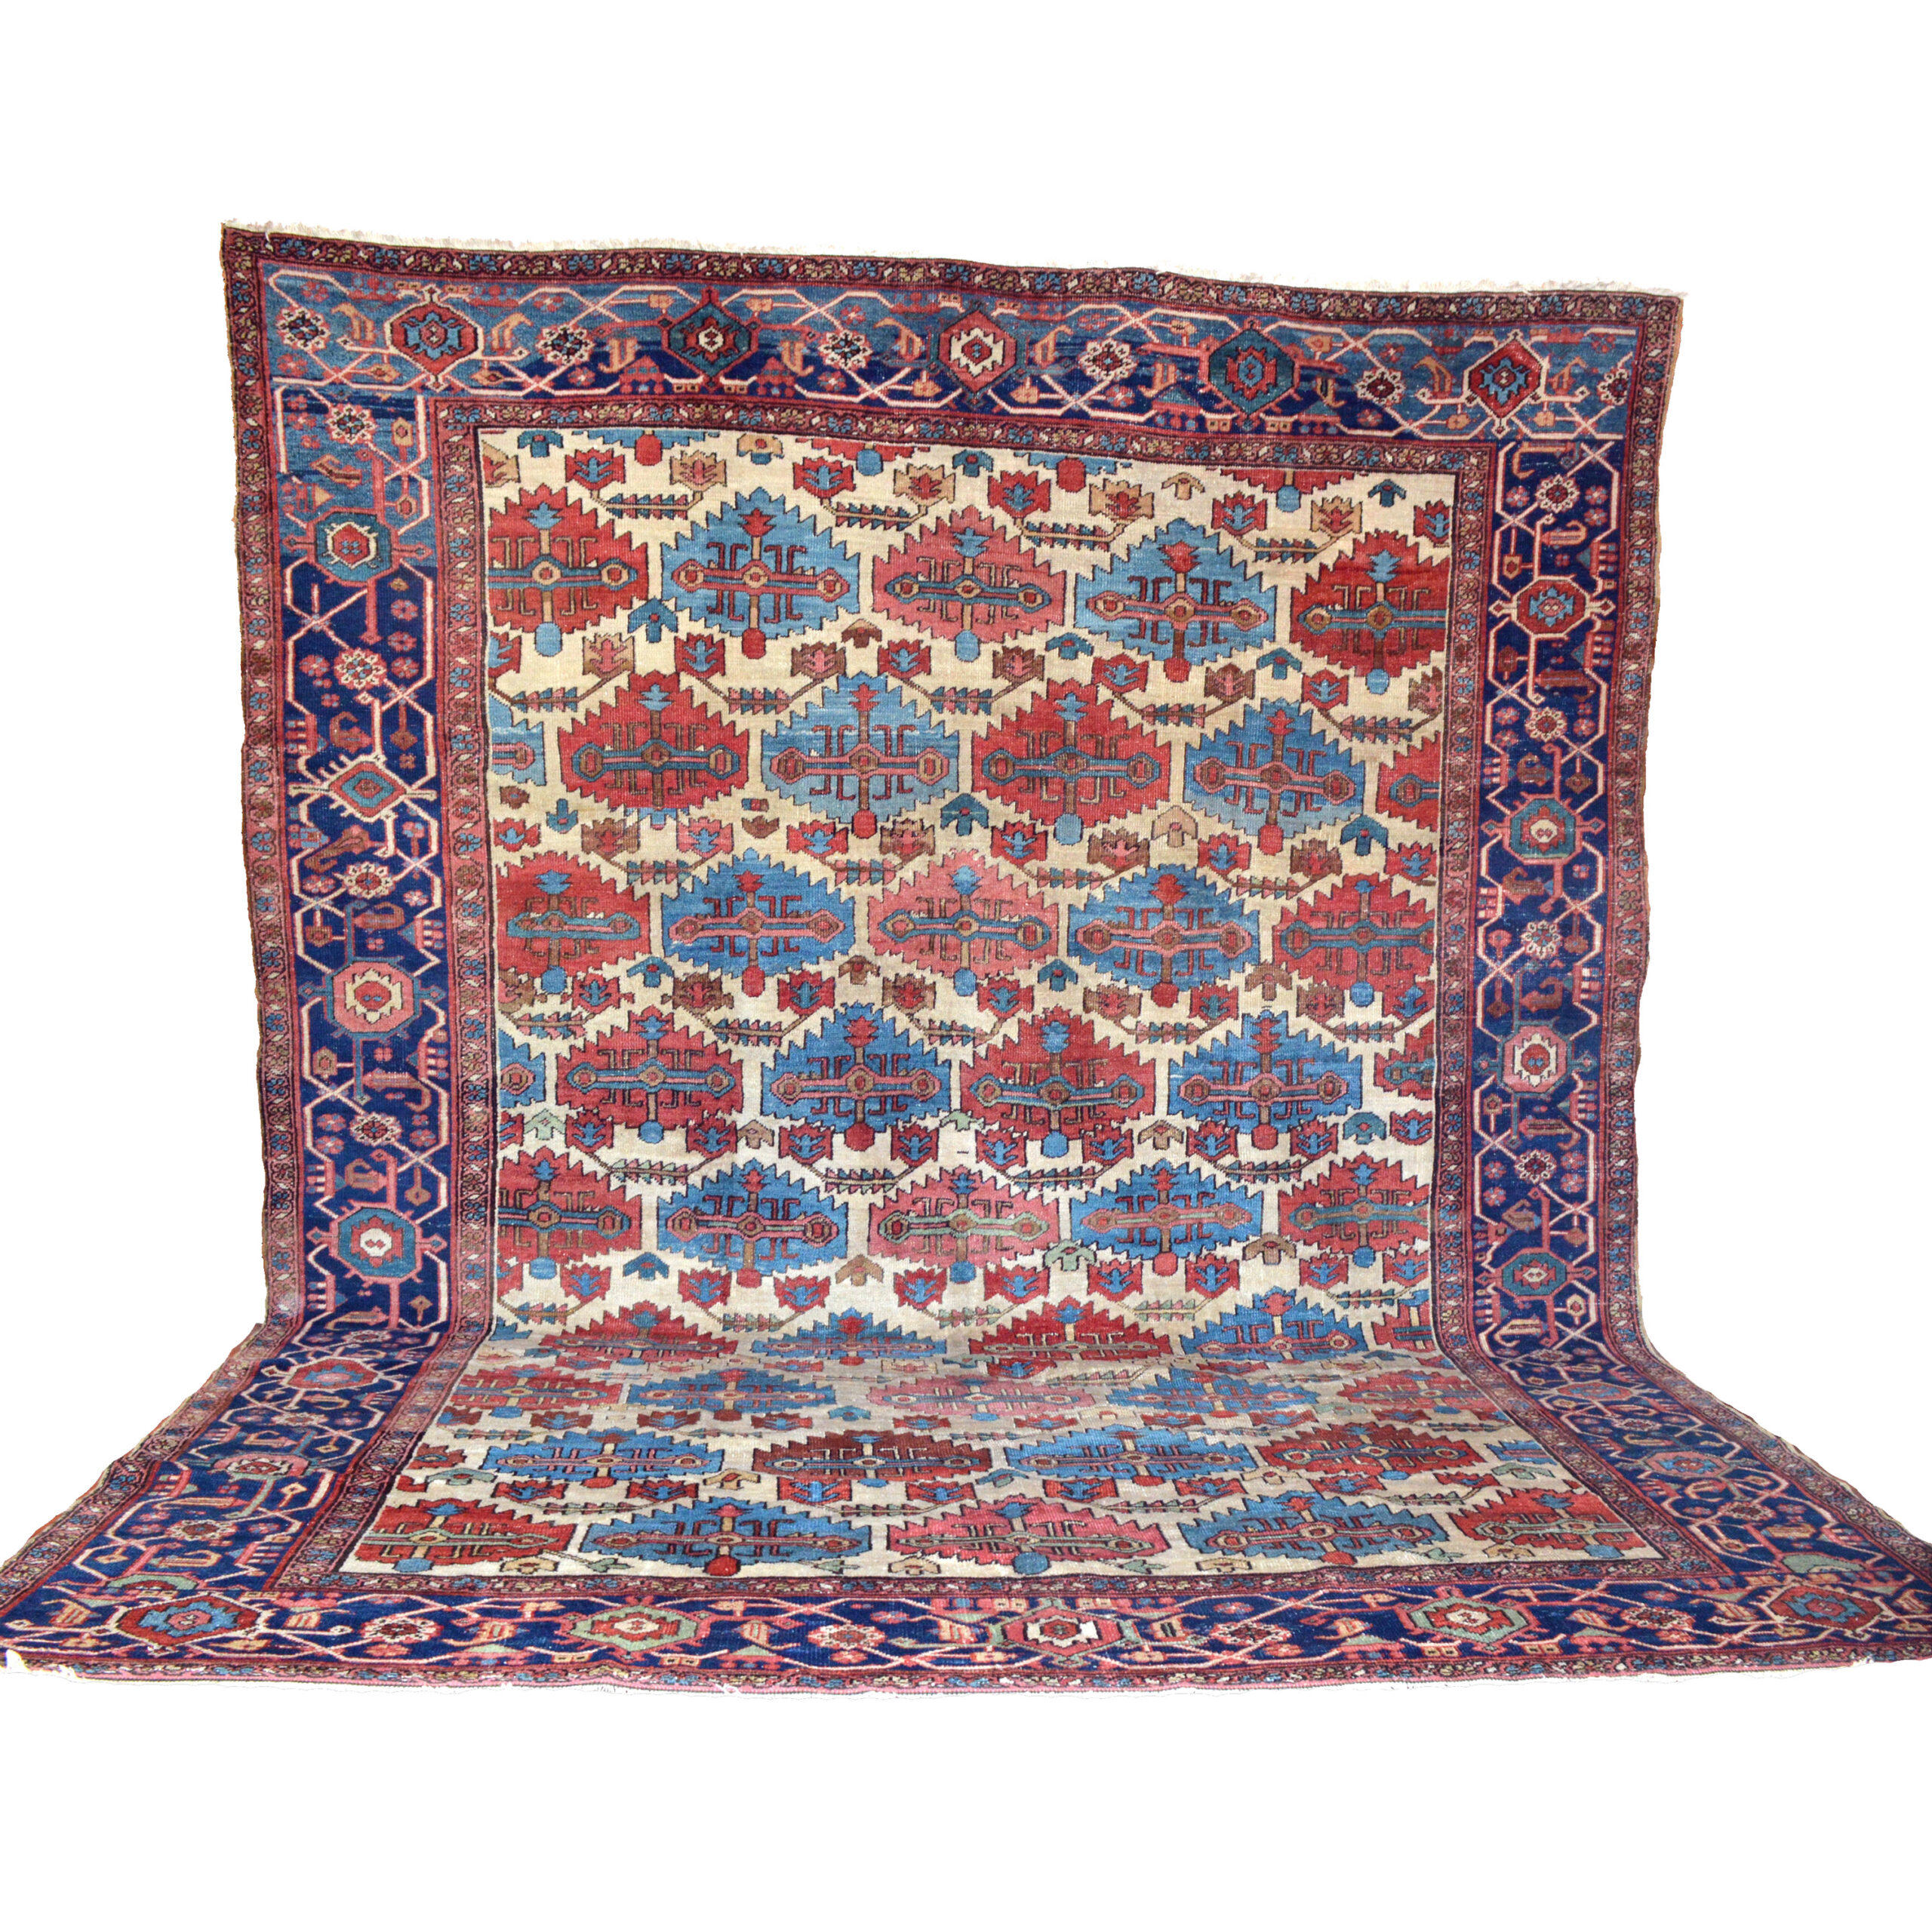 An antique northwest Persian carpet from the Heriz district, possibly from the village of Bakshaish. Douglas Stock Gallery Antique Carpet Research Archives, antique Oriental rugs Boston,MA area, antique carpets New England, antique decorative carpets New York